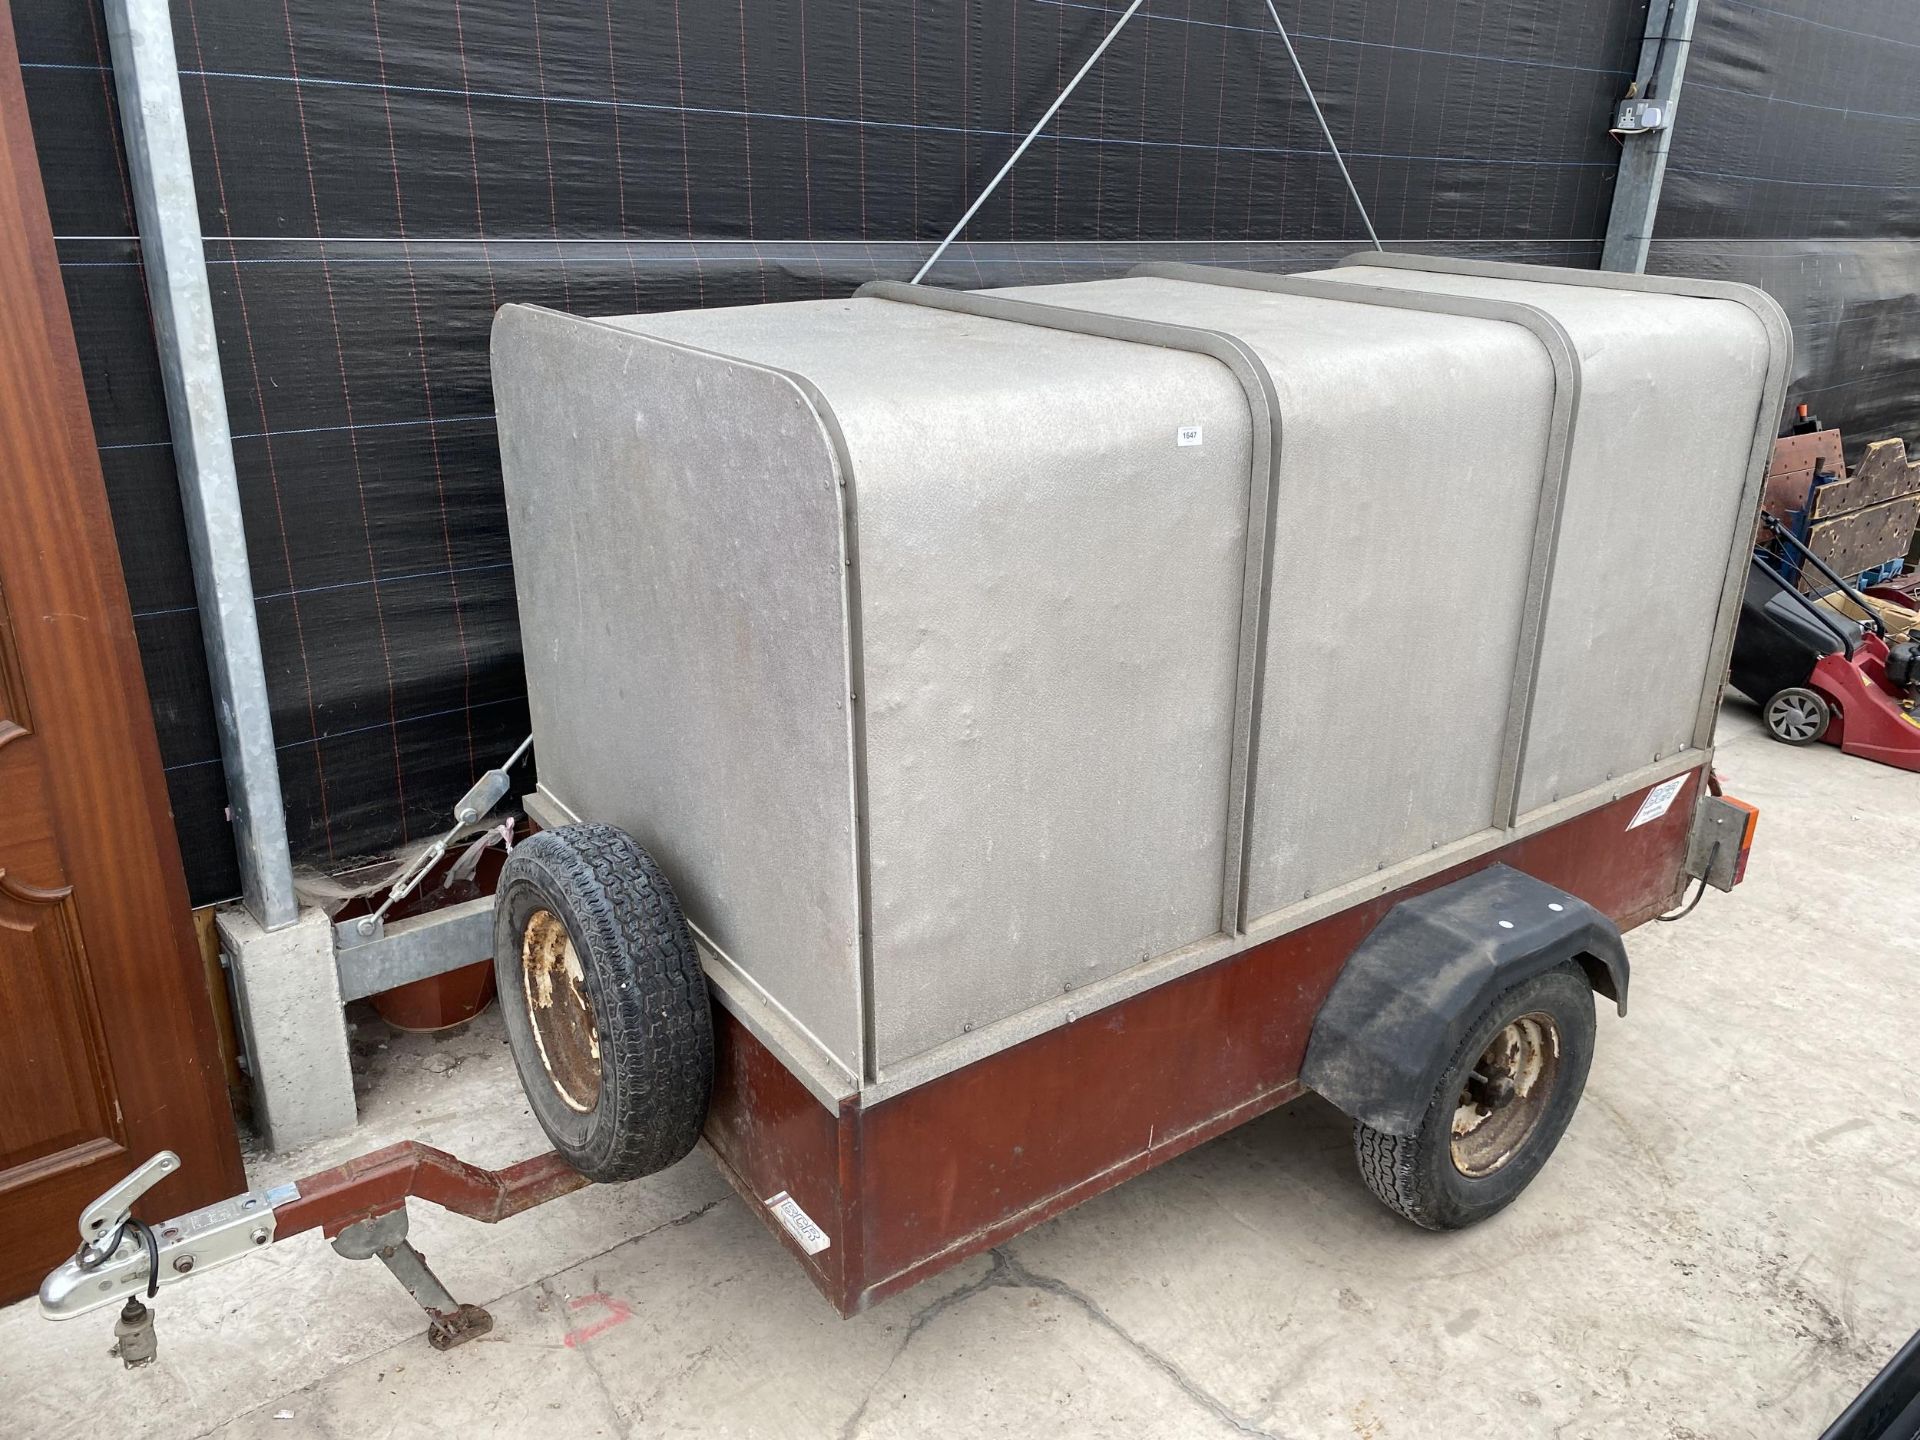 A 6FT BCR CAR TRAILER WITH ANIMAL TRANSPORTER TOP